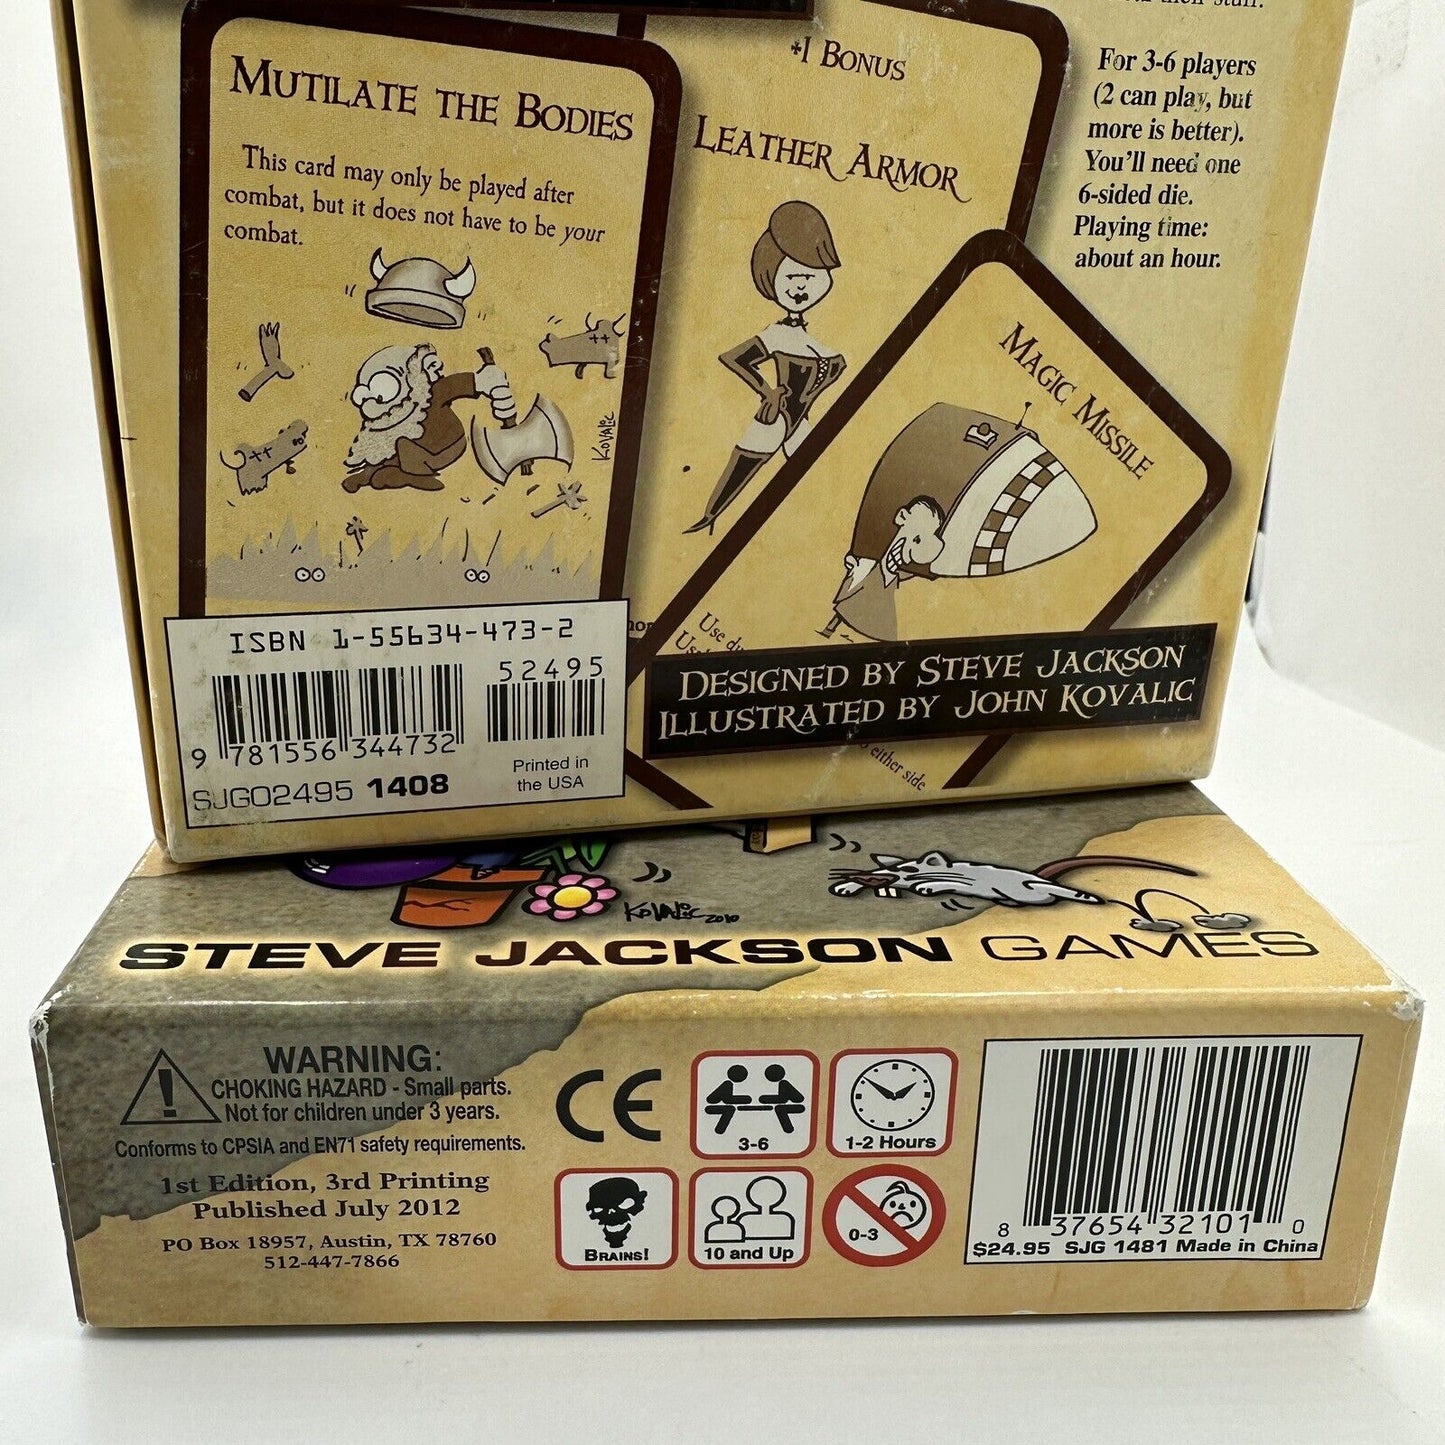 Munchkin Lot Original and Zombies Card Game Steve Jackson Games 2012 Fun Party